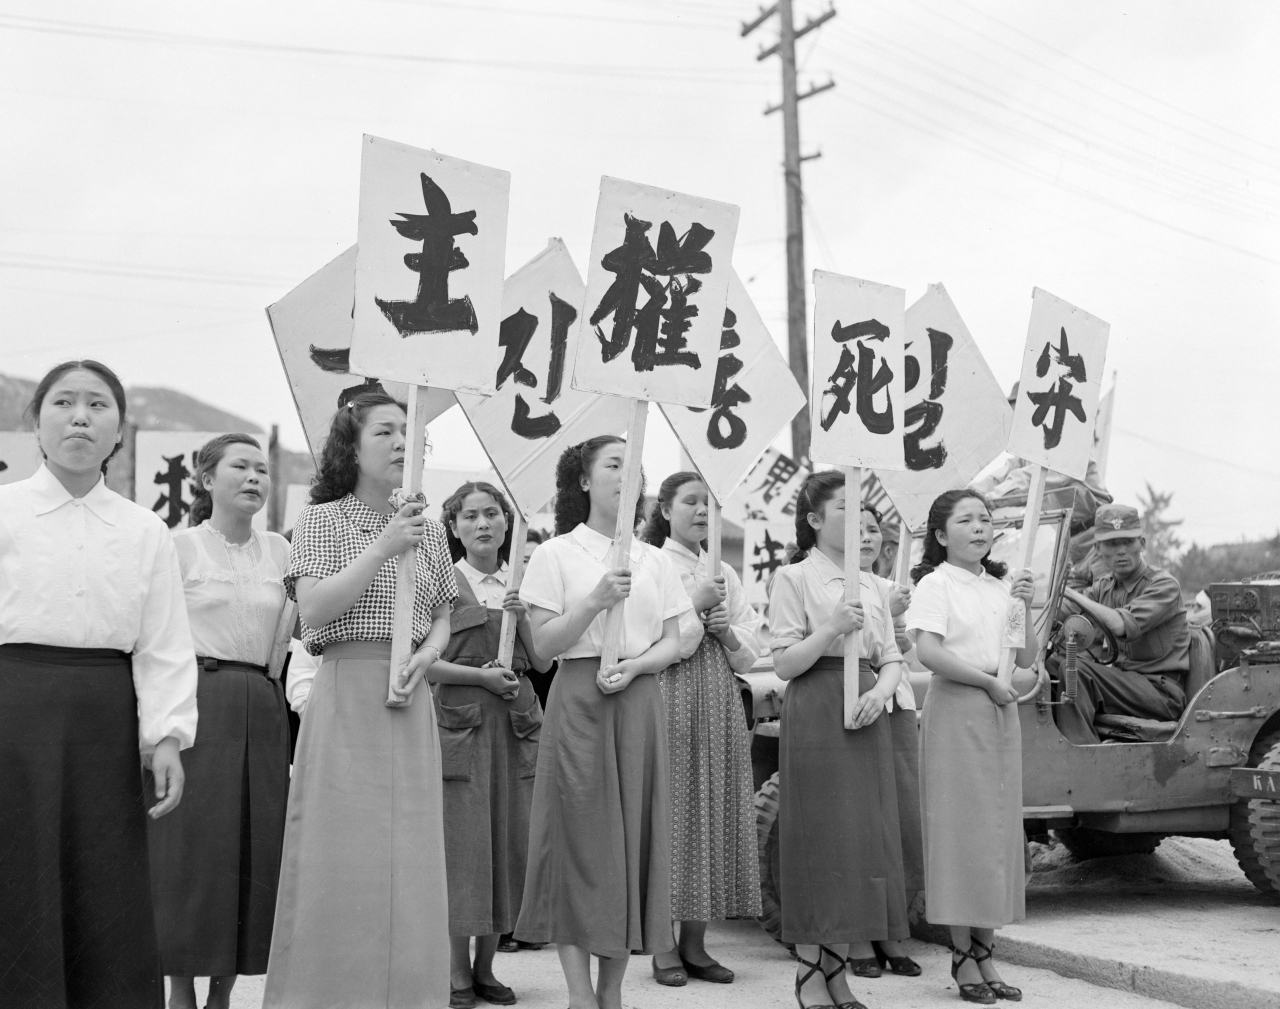 This archived photo shows the nationwide people's rally for unification of Koreas that was held across the country in 1954. (National Archives of Korea)